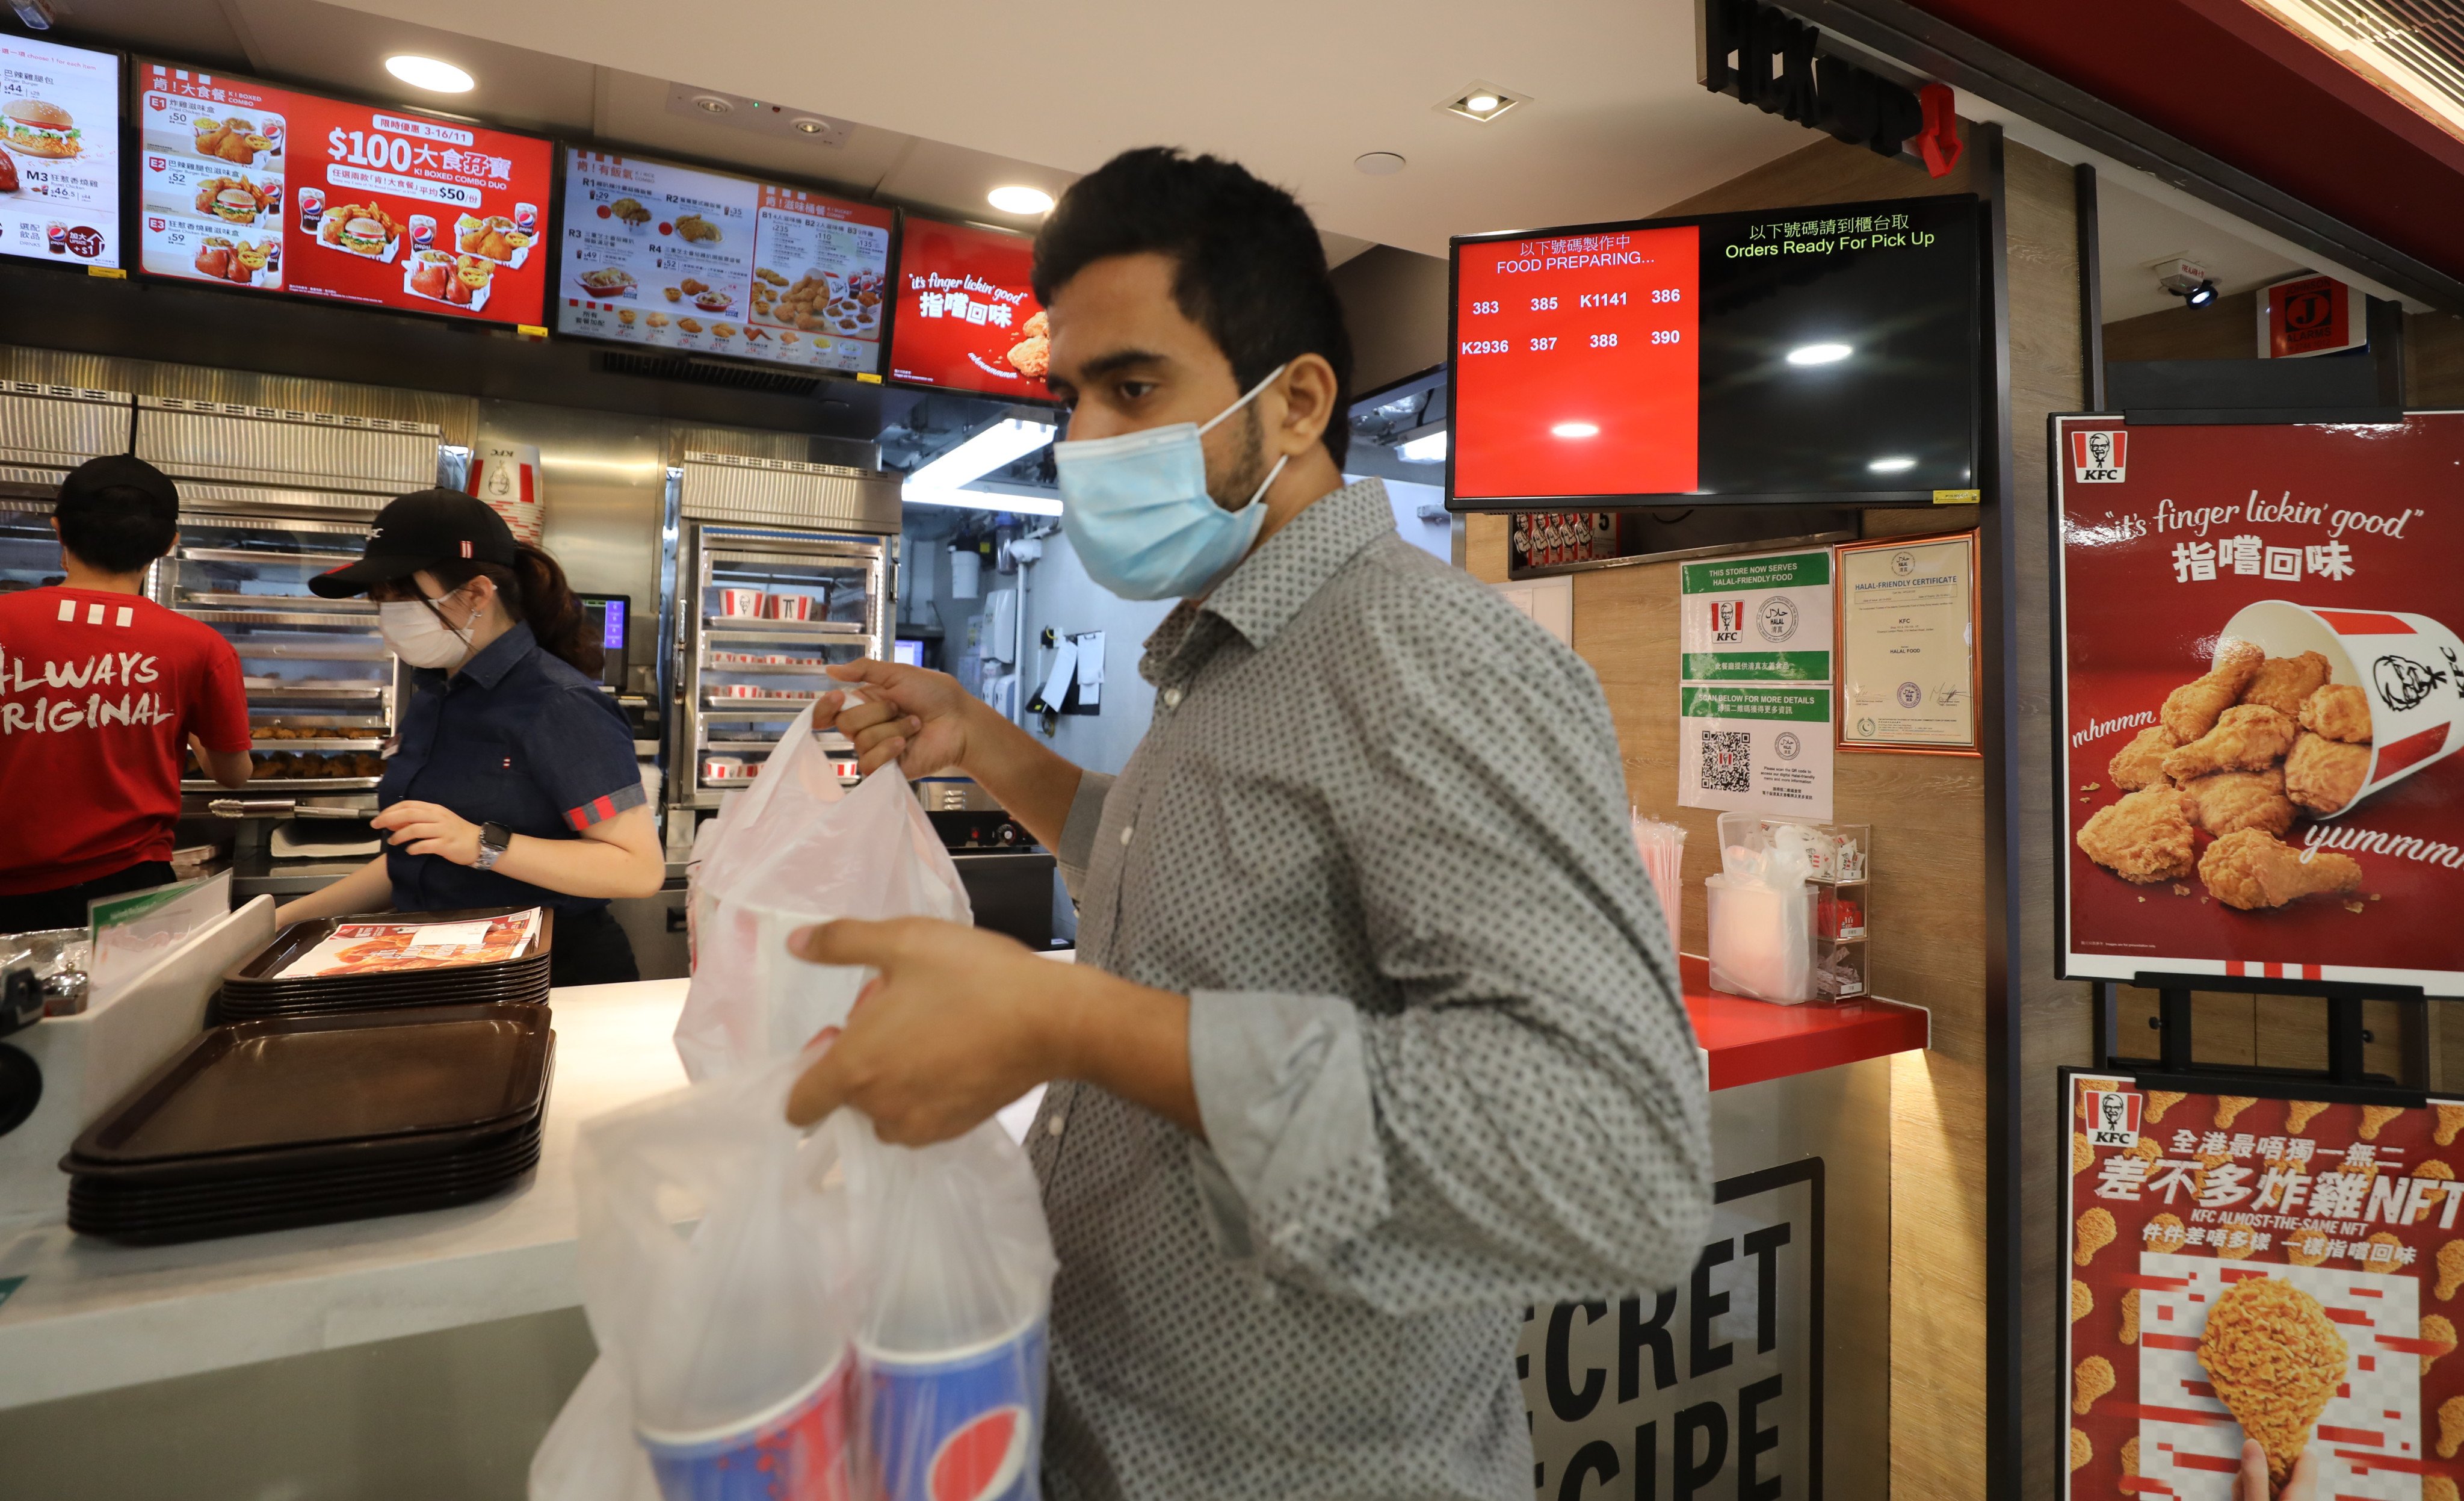 A halal-certified KFC in Hong Kong’s Jordan. The city currently has 116 food premises that are certified as halal. Photo: Xiaomei Chen